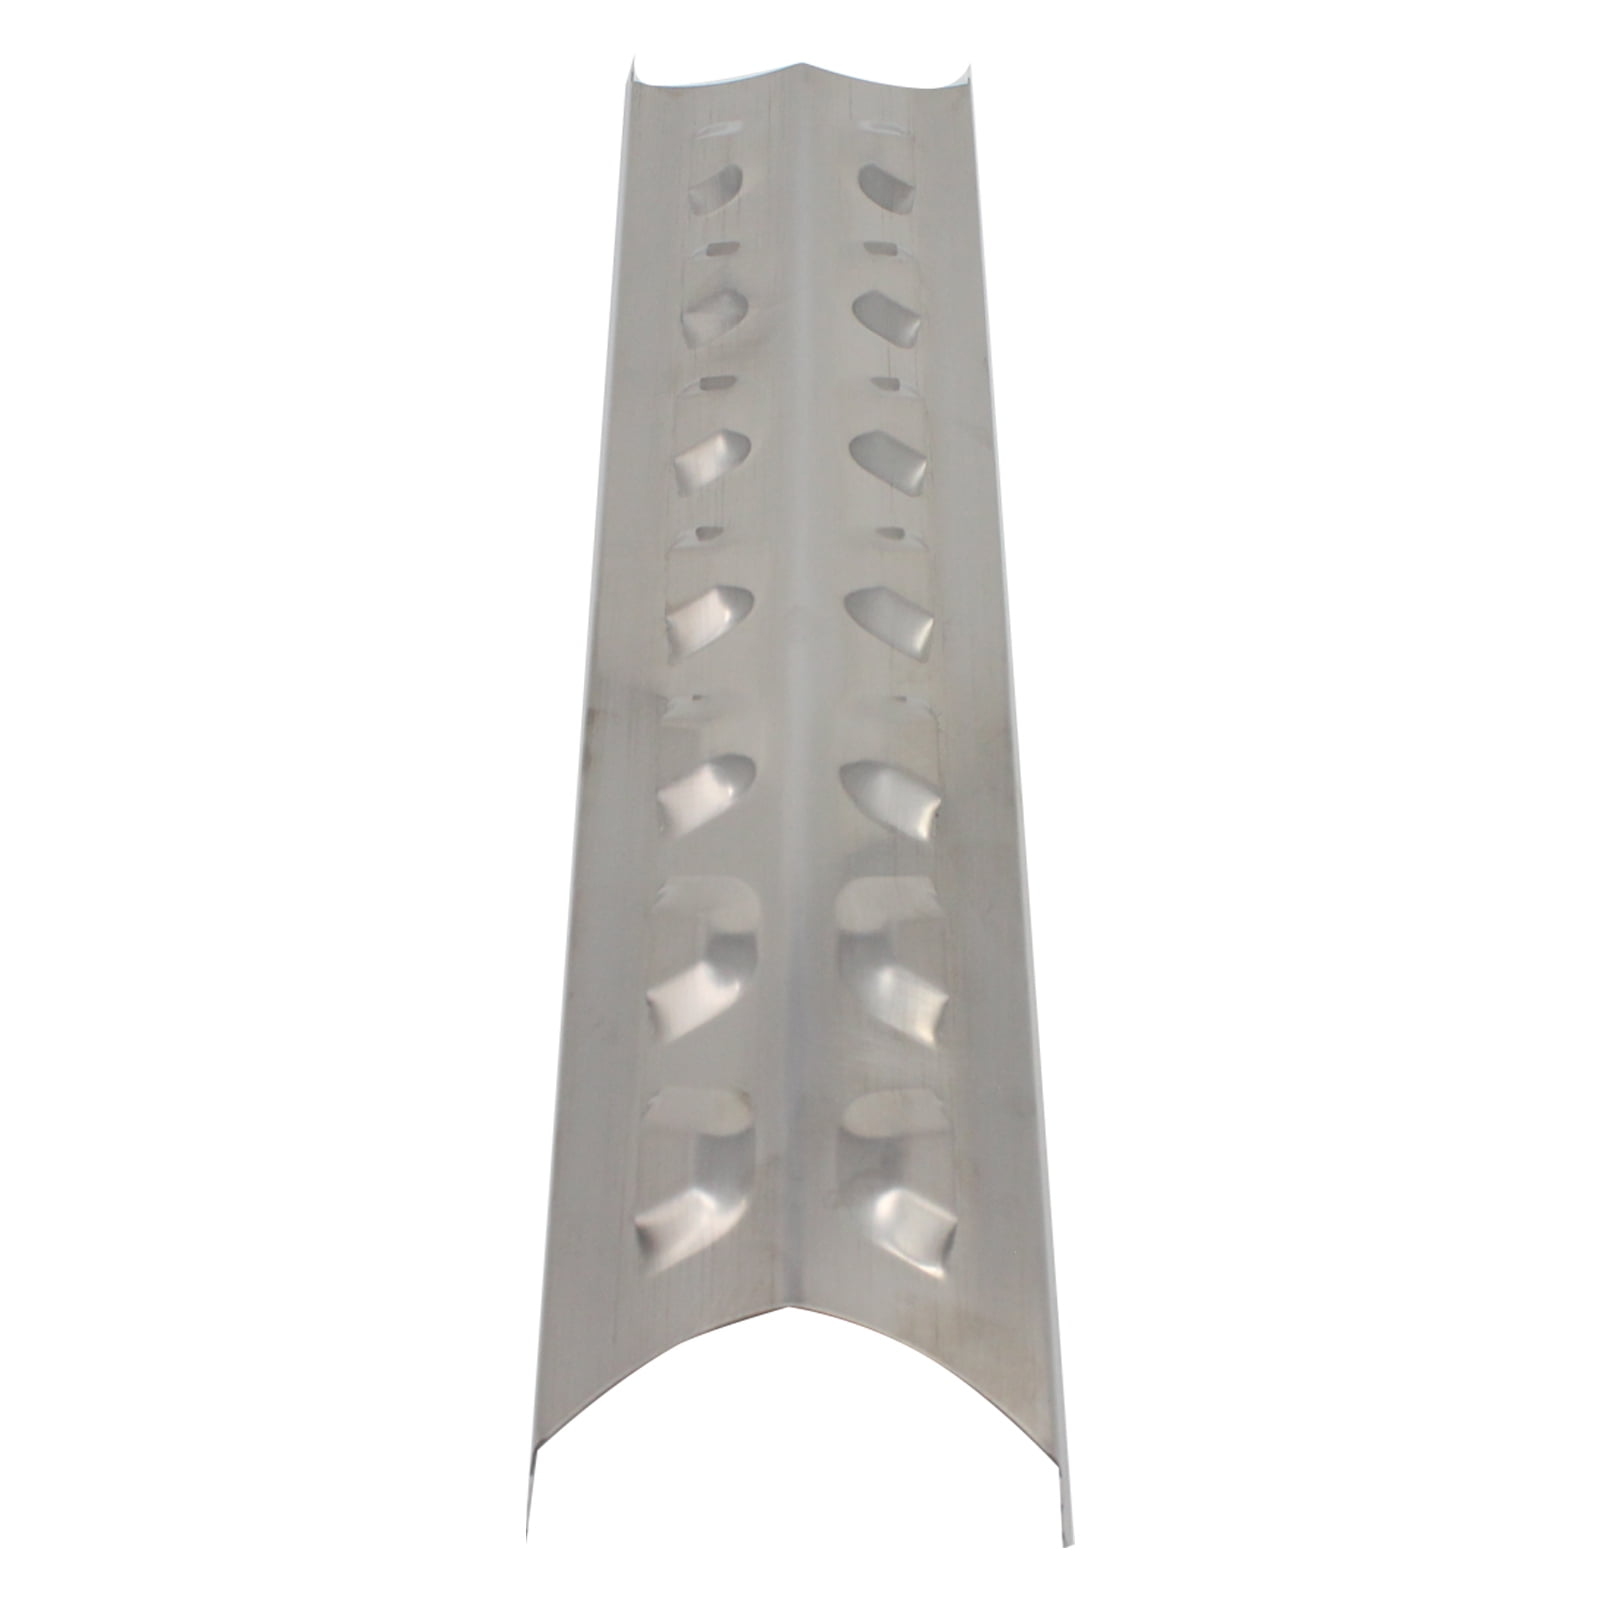 BBQ Grill Heat Shield Plate Tent Replacement Parts for Kenmore 